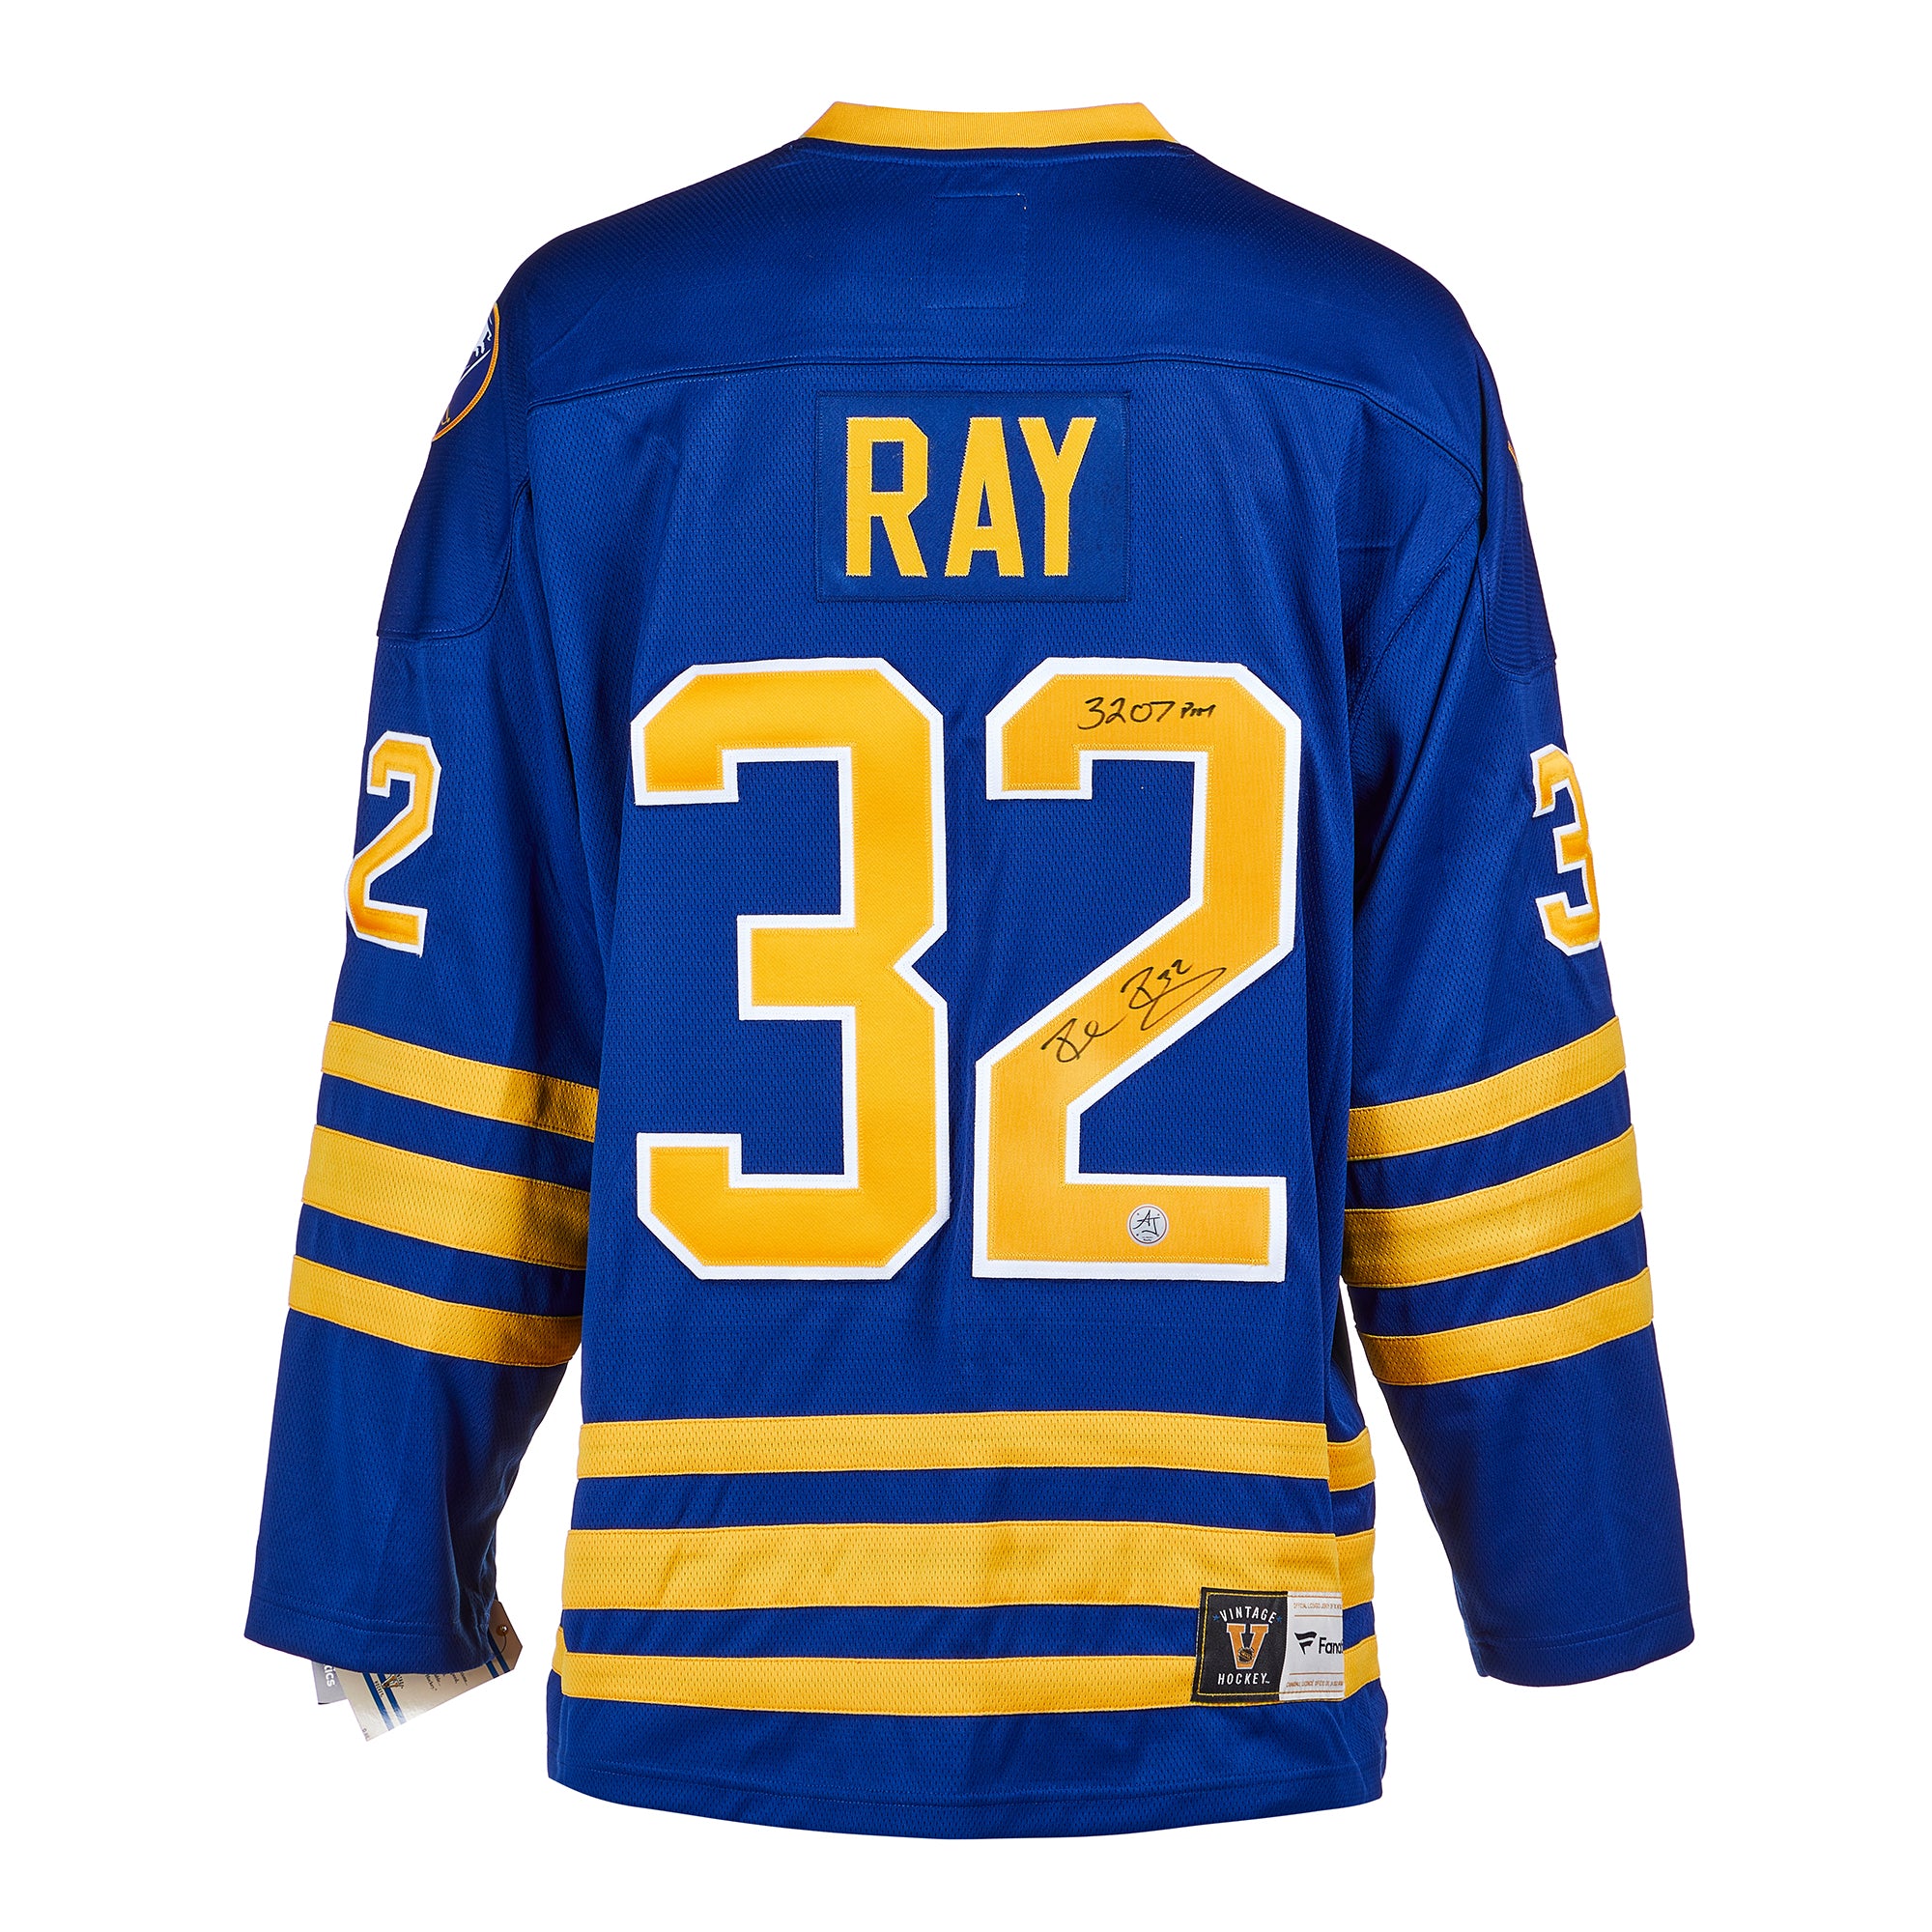 ROB RAY Jersey Photo Picture Art Buffalo SABRES Throwback 